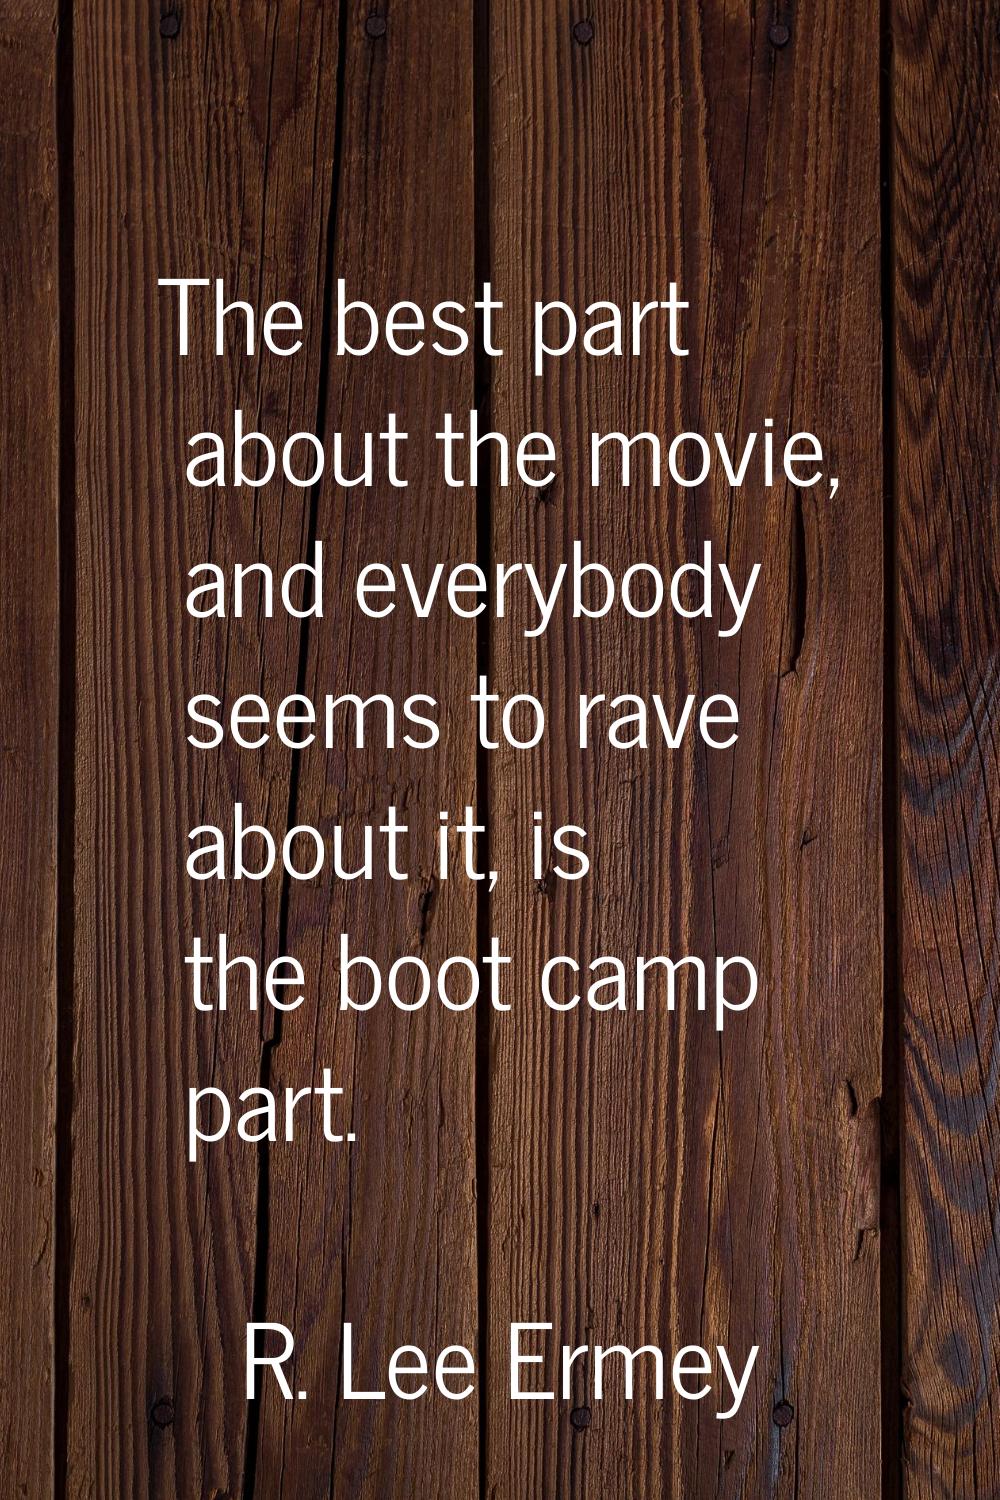 The best part about the movie, and everybody seems to rave about it, is the boot camp part.